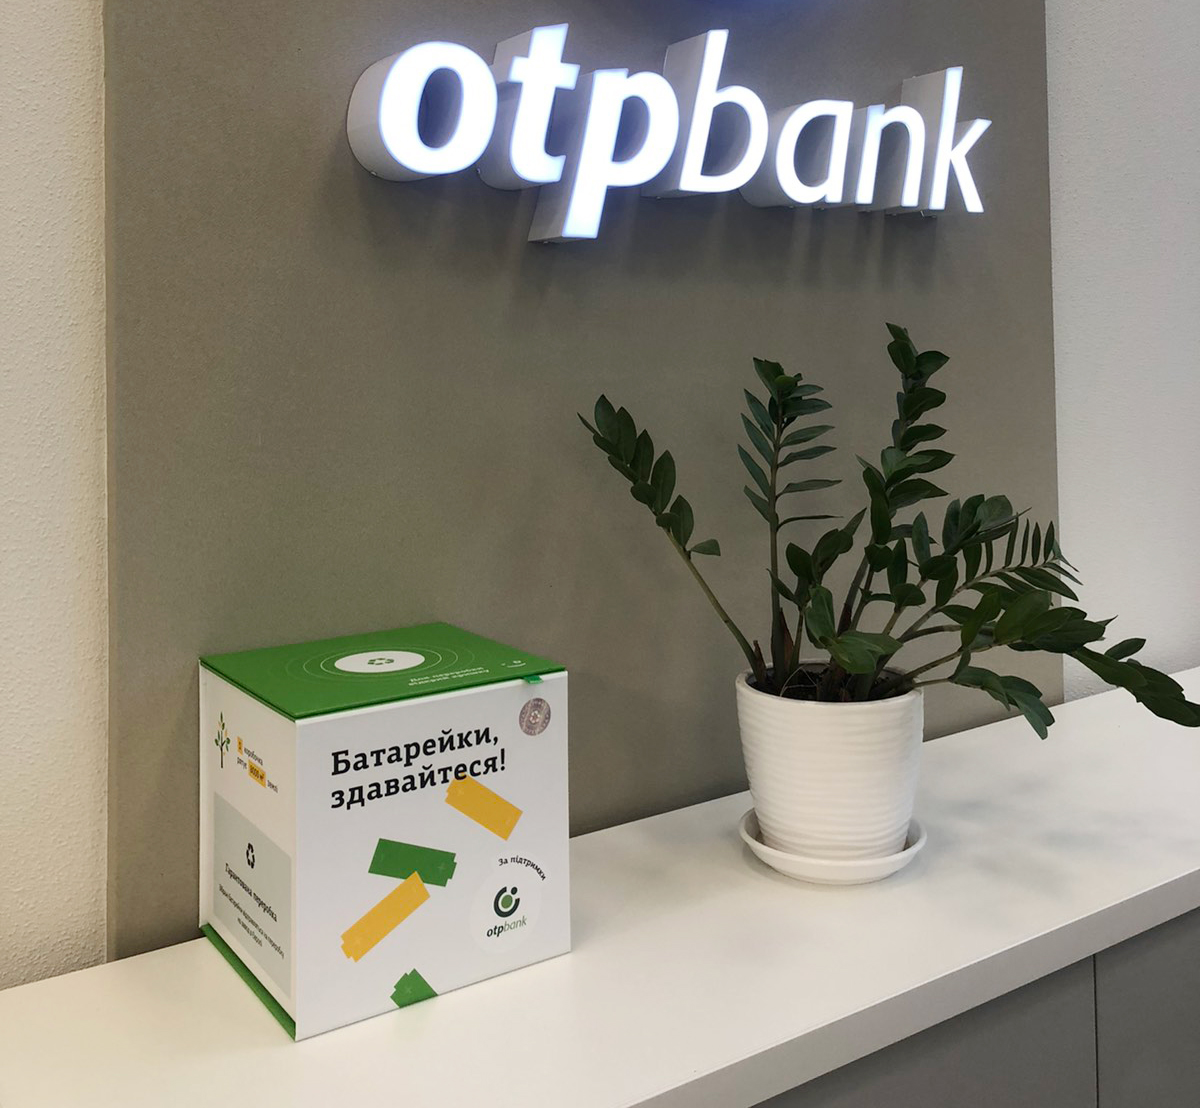 OTP Bank has launched a "green" project to collect used batteries